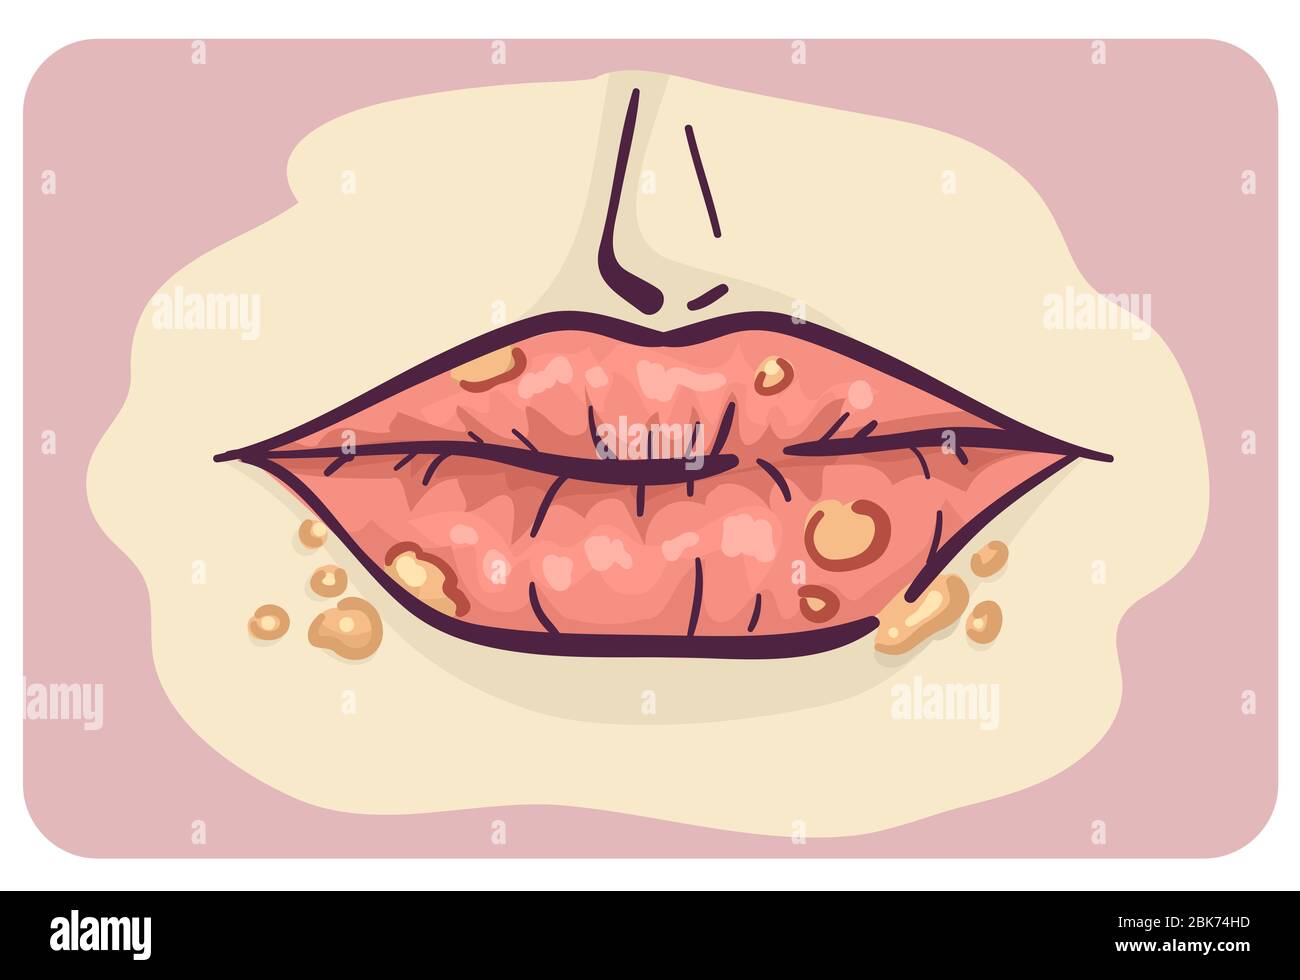 Illustration of Lips with Cold Sores Symptom of Infection Stock Photo